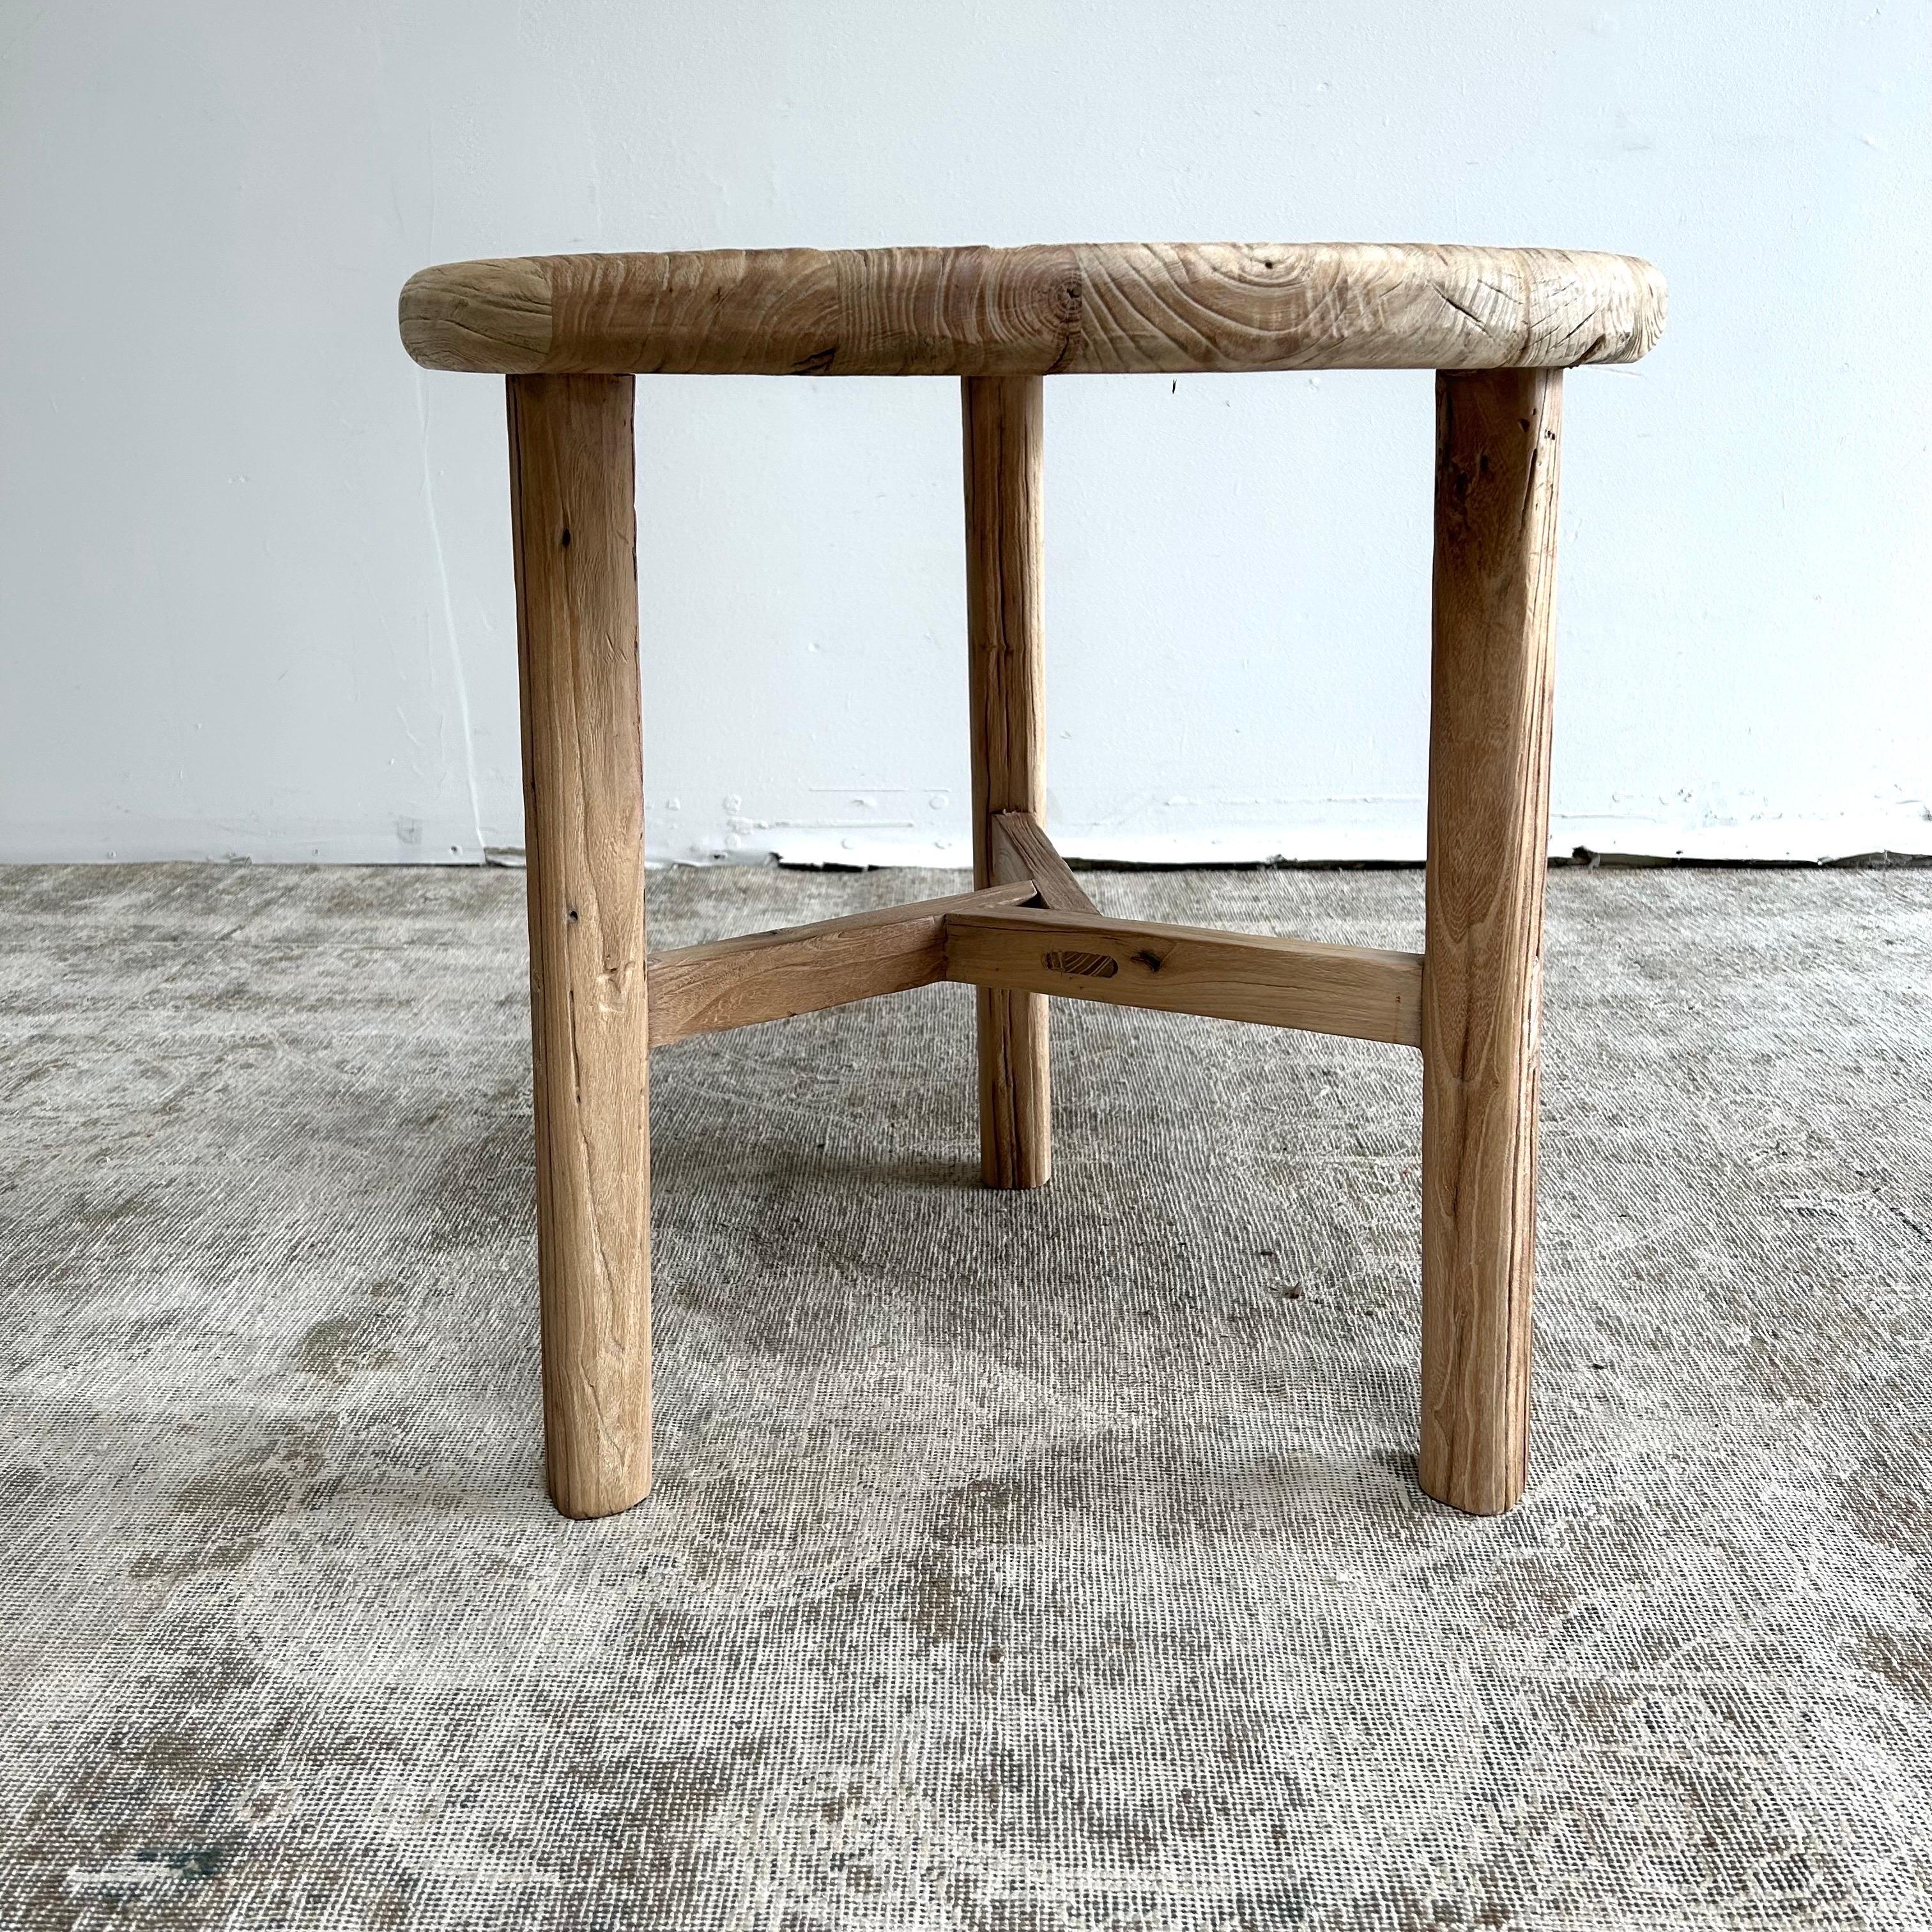 Can be customized to any size. Natural raw patina, solid elm wood, made by bloom home inc. Solid and sturdy, great for use next to a sofa, in between chairs, in a bath, or bedside.
26” rd. X 26”h